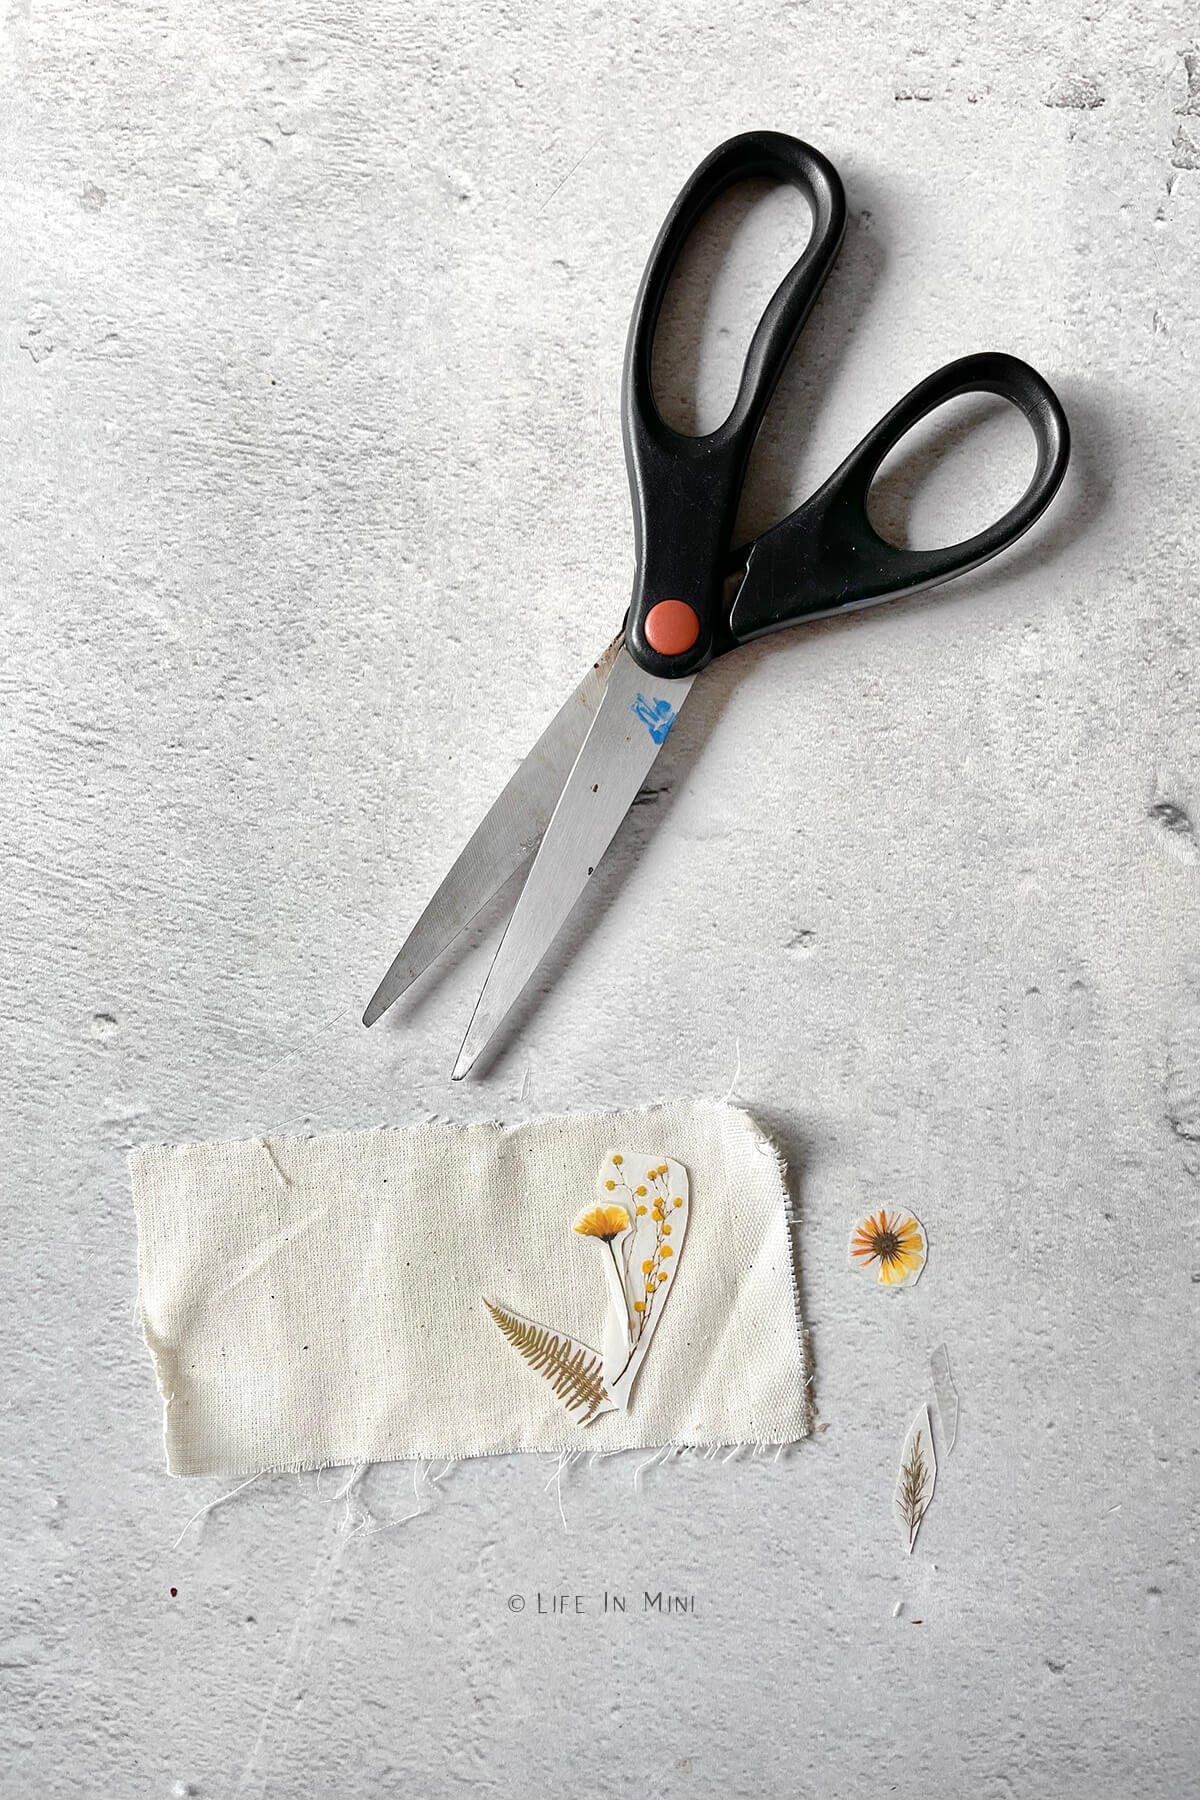 Scissors next to a rectangular piece of fabric with rub off transfers cut out on it